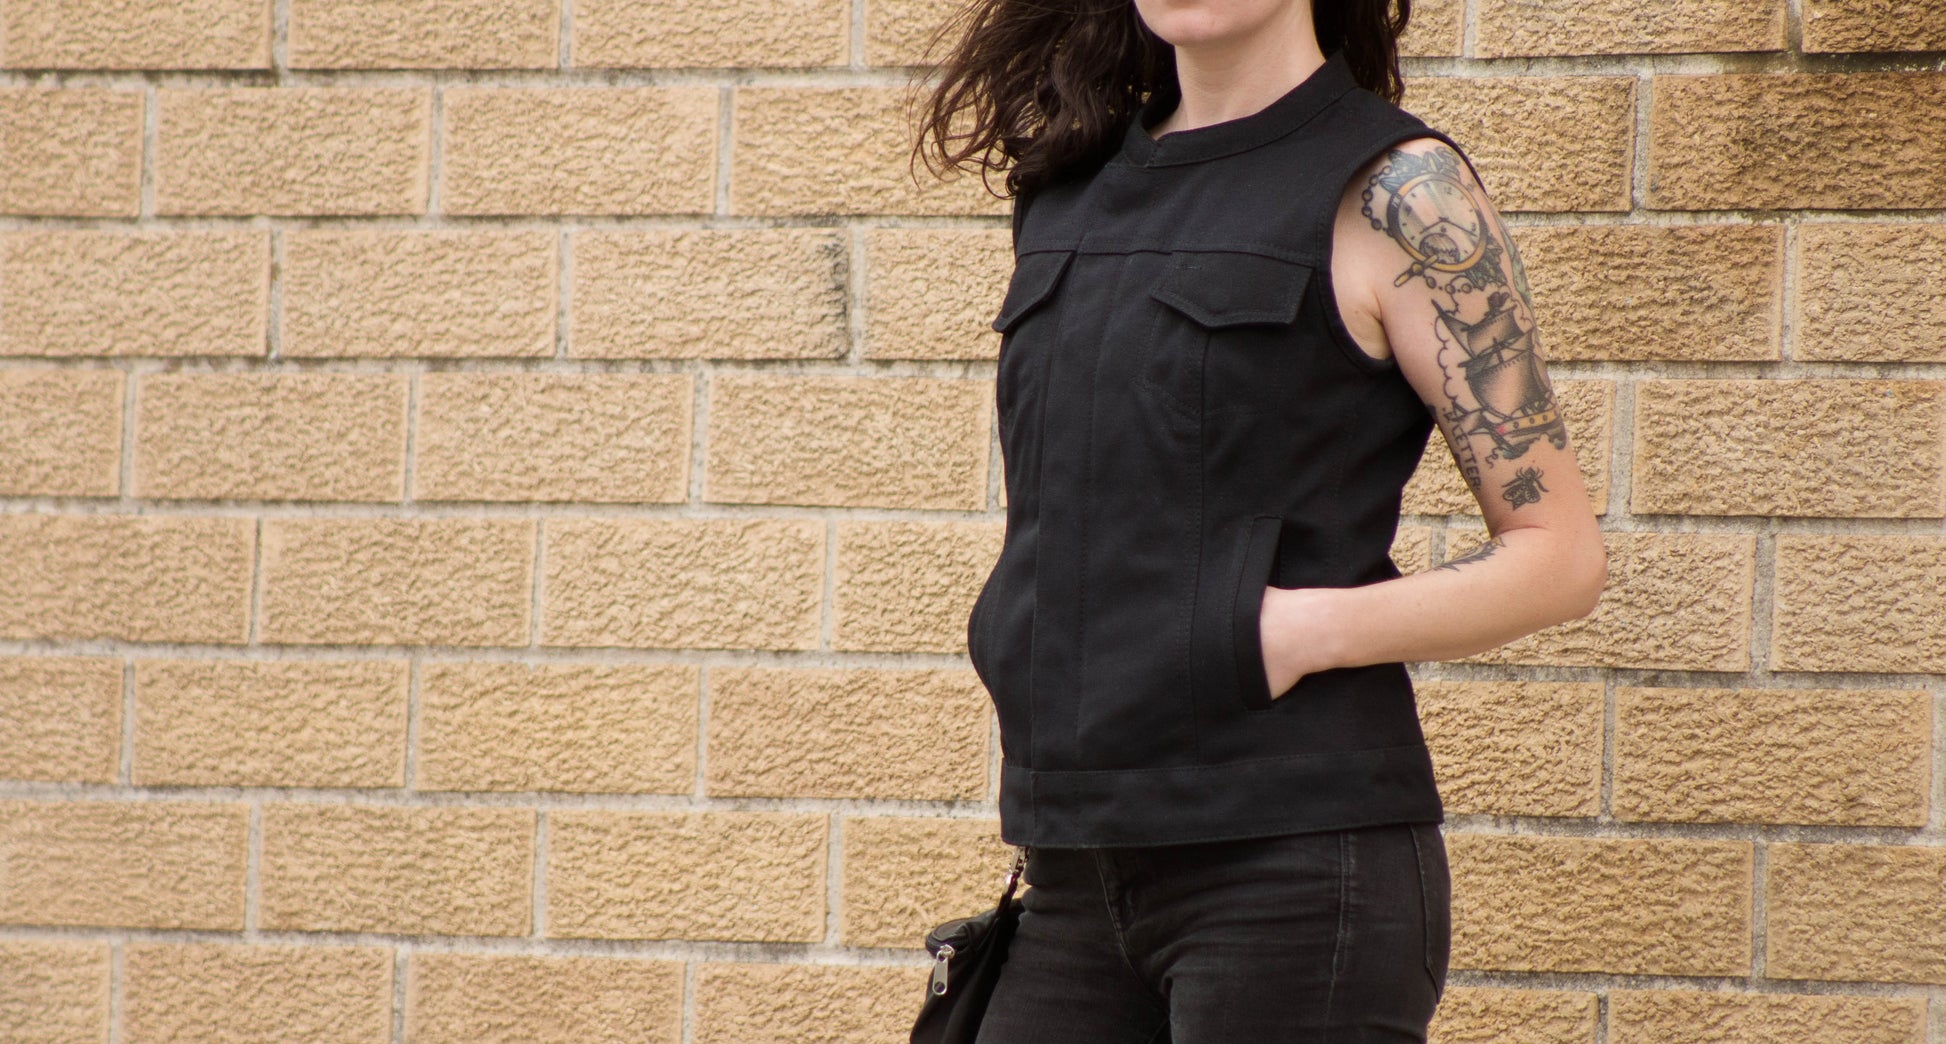 Women wearing front view - Club Style vest - Heavy Hitter Canvas - Conceal carry pockets